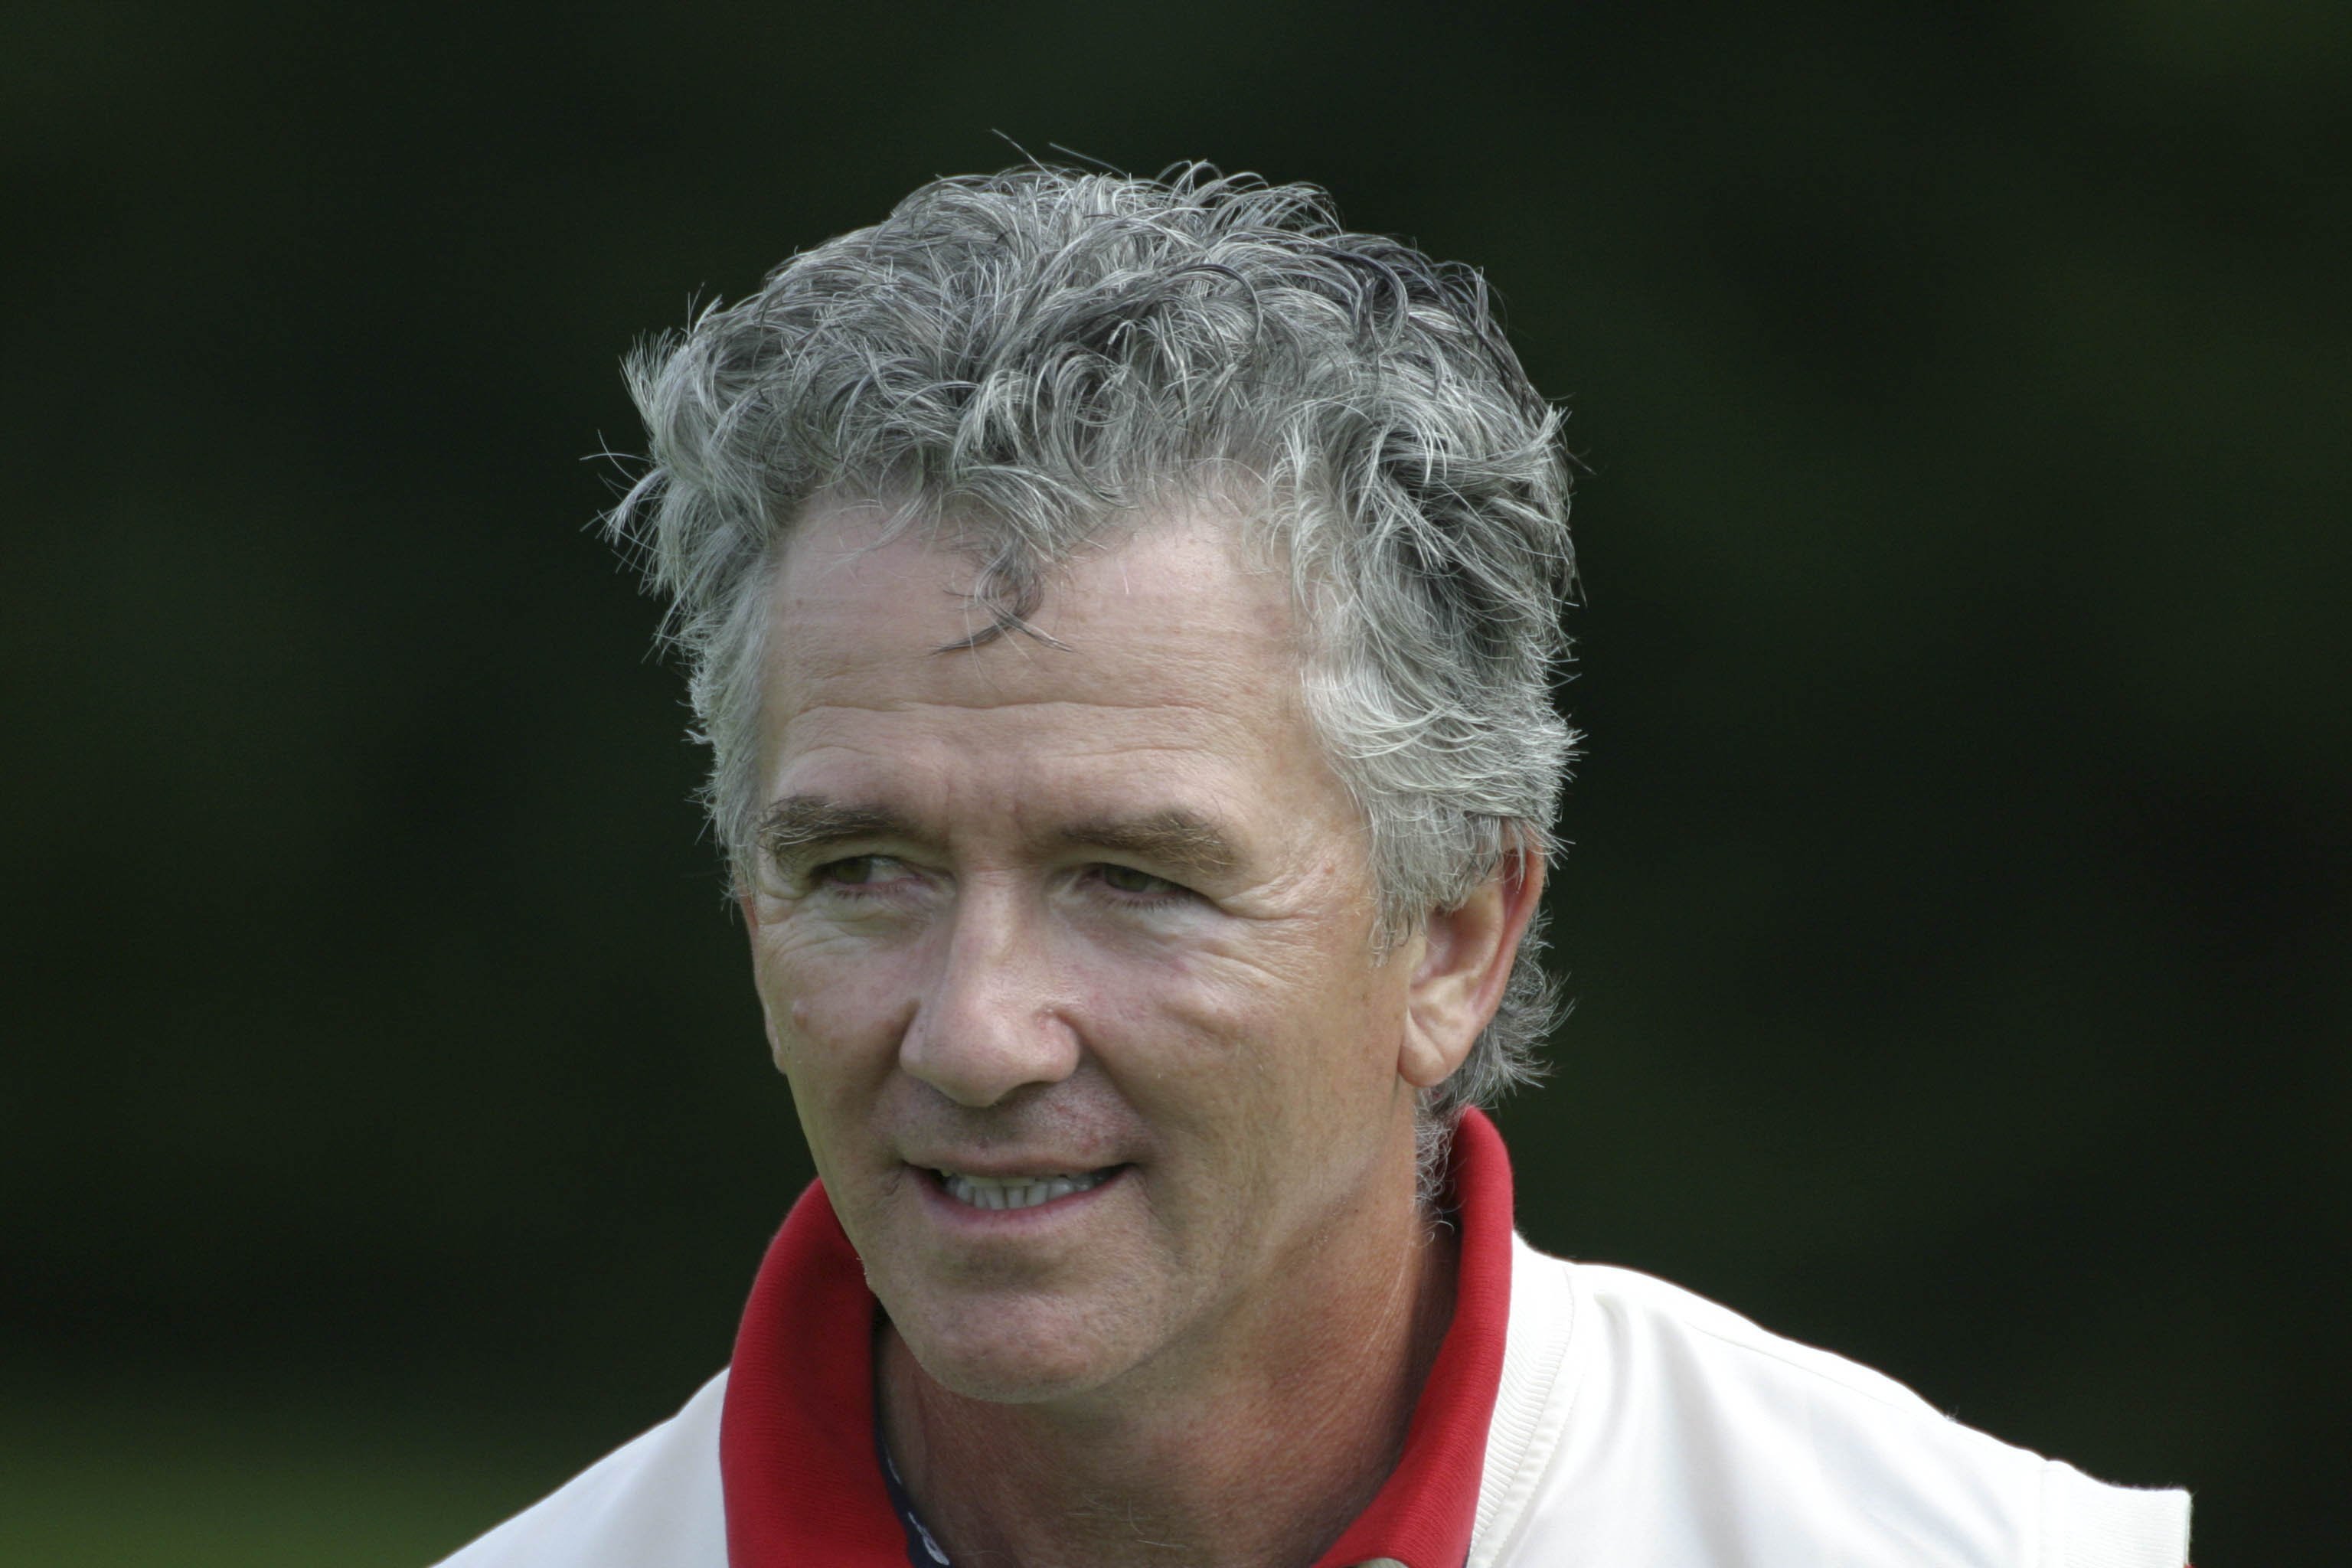 Patrick Duffy I Image: Getty Images